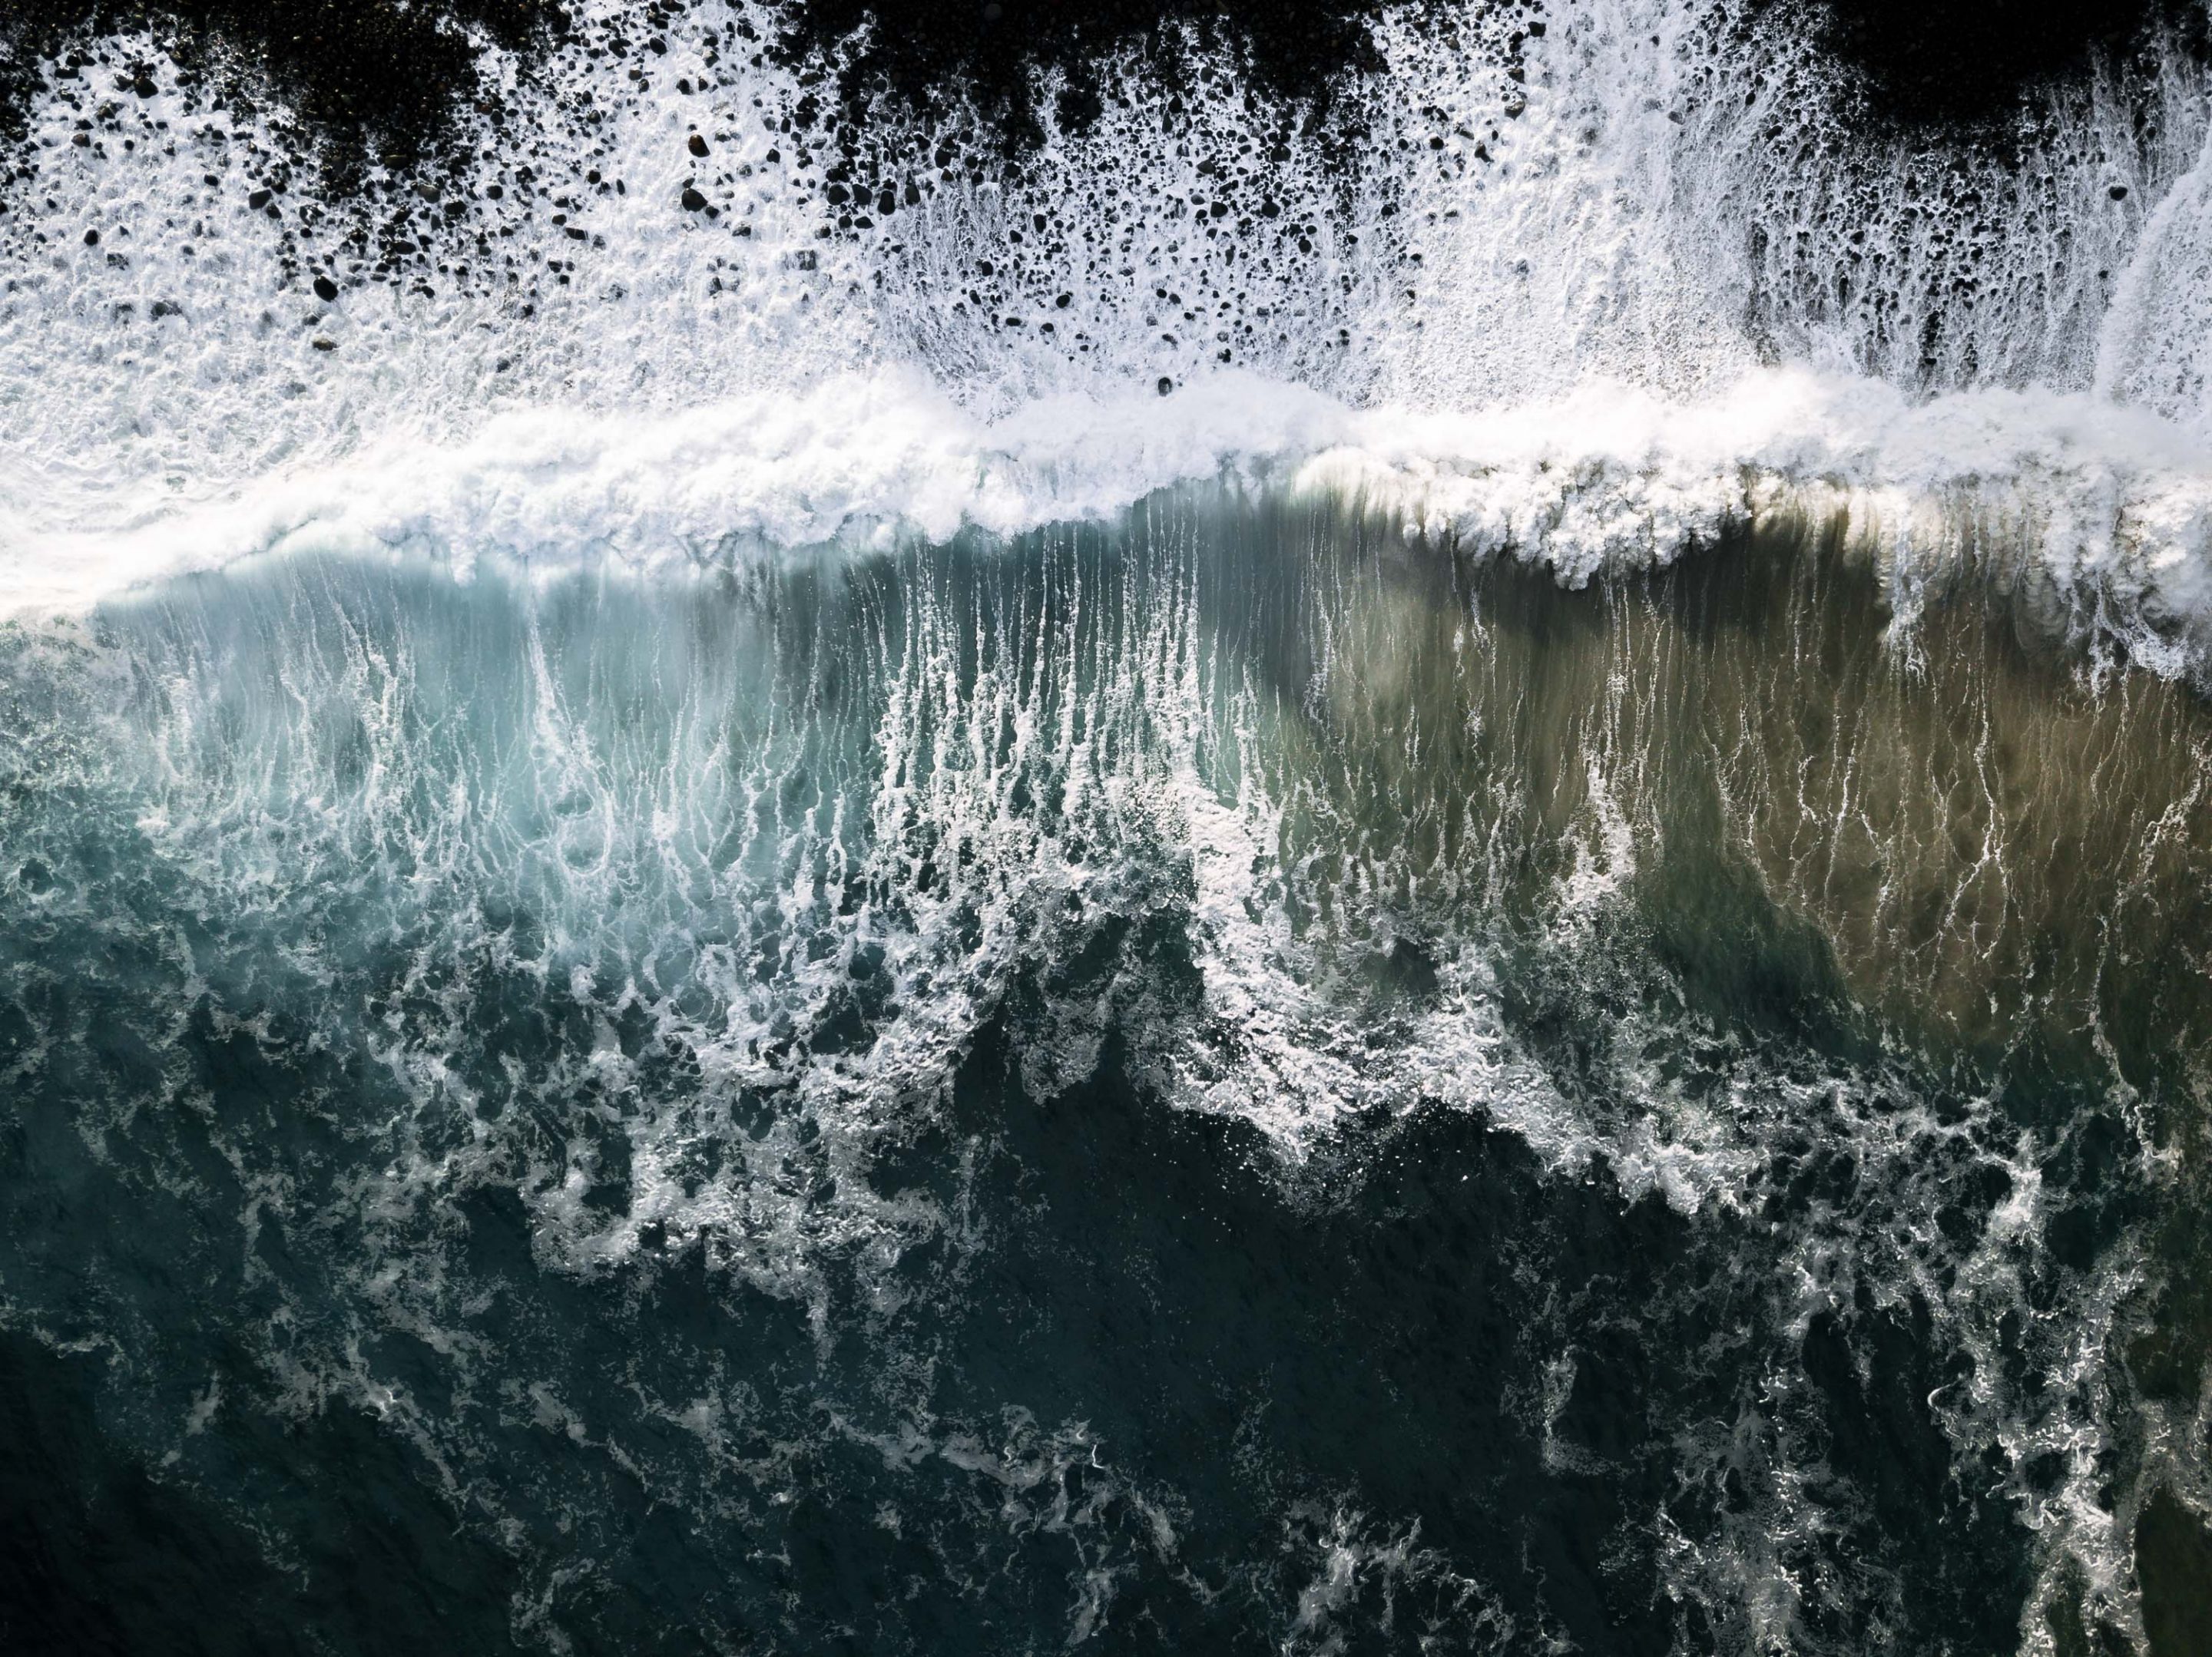 Drone image of crashing waves during sunset out on the Atlantic near Madeira island, Portugal by photographer Michael Schauer